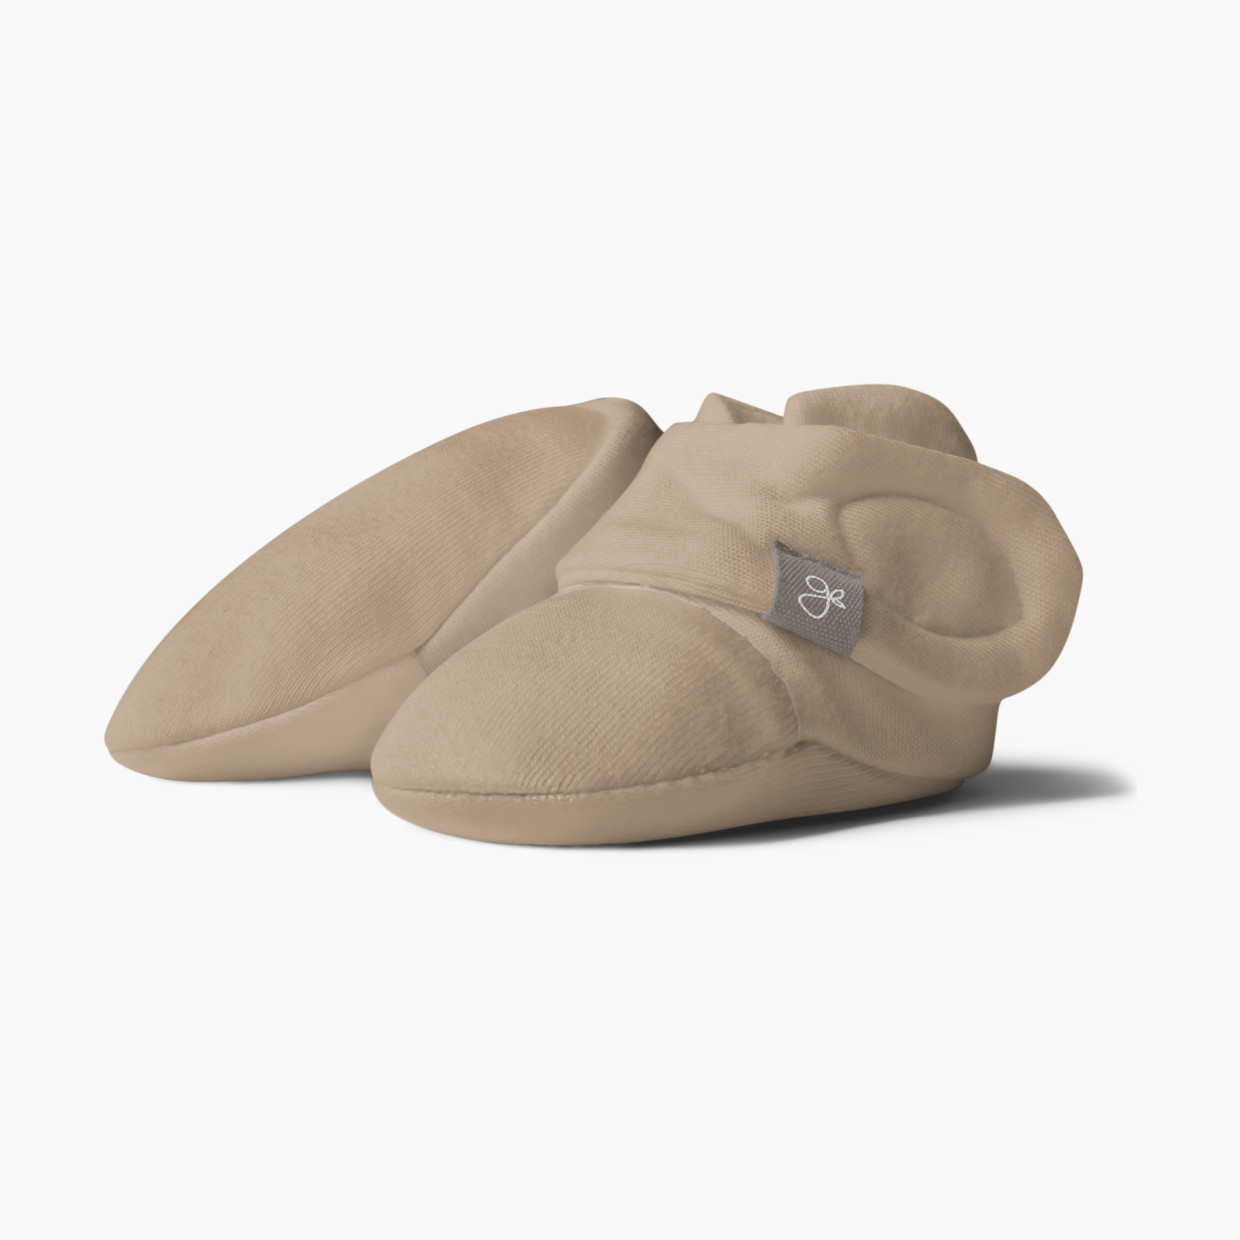 Goumi Kids Stay On Baby Boots - Sandstone, 0-3 M.